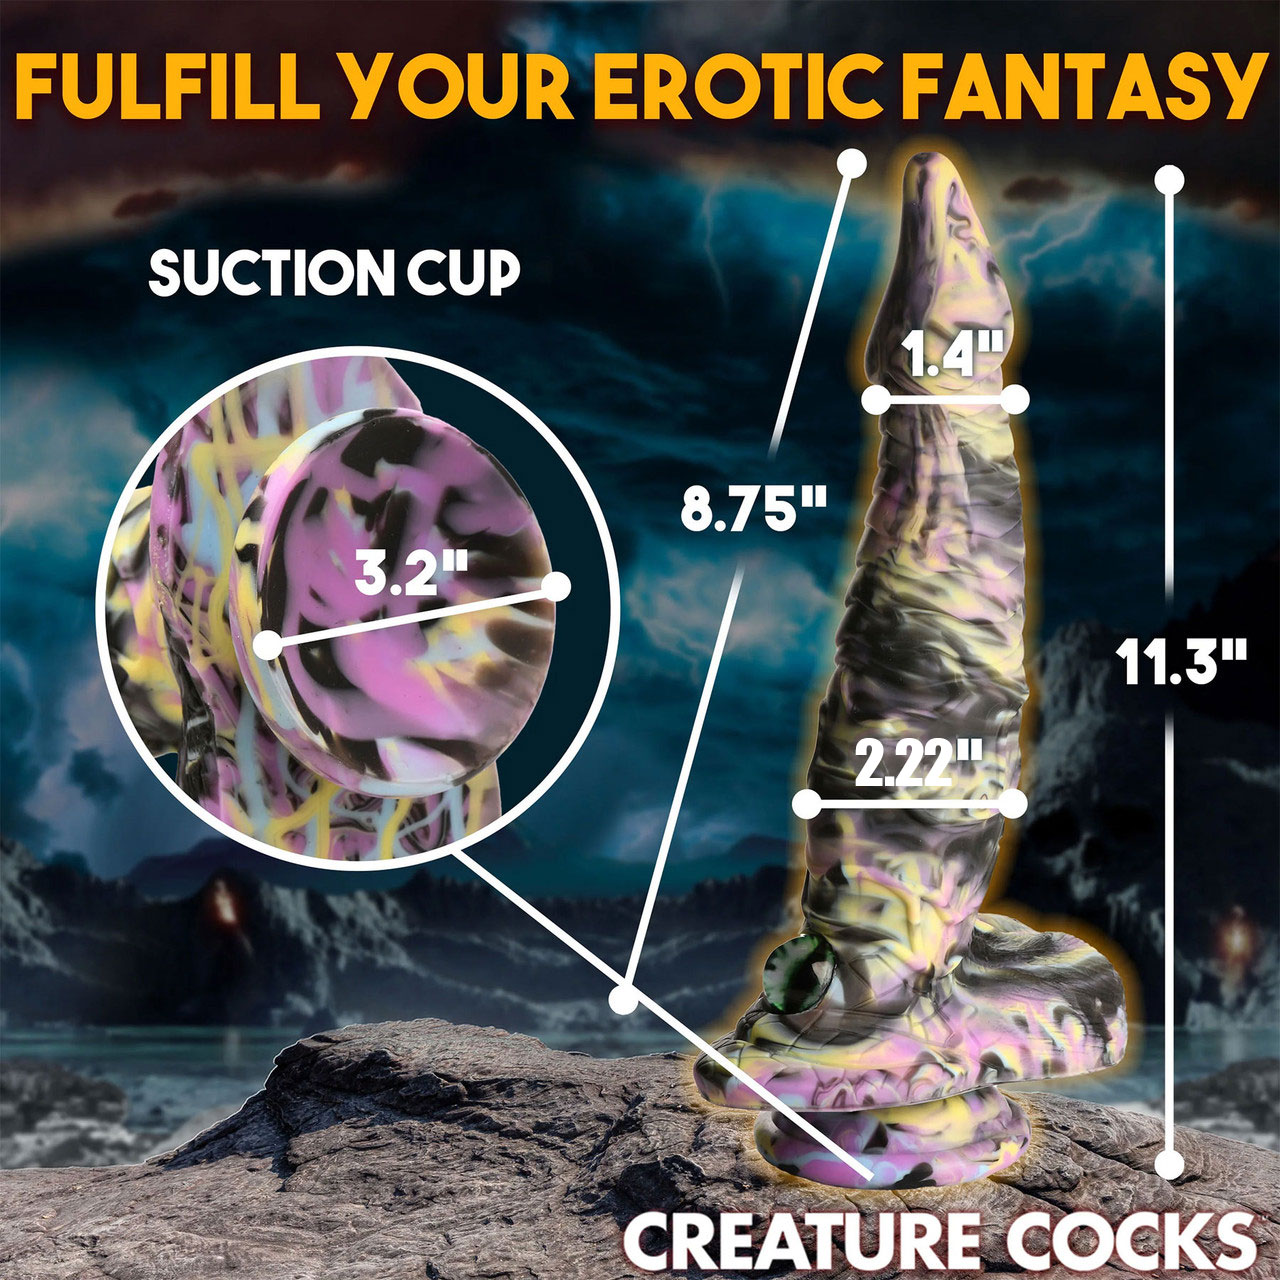 Cyclops Monster 11" Silicone Suction Cup Dildo With Balls By Creature Cocks - Measurements